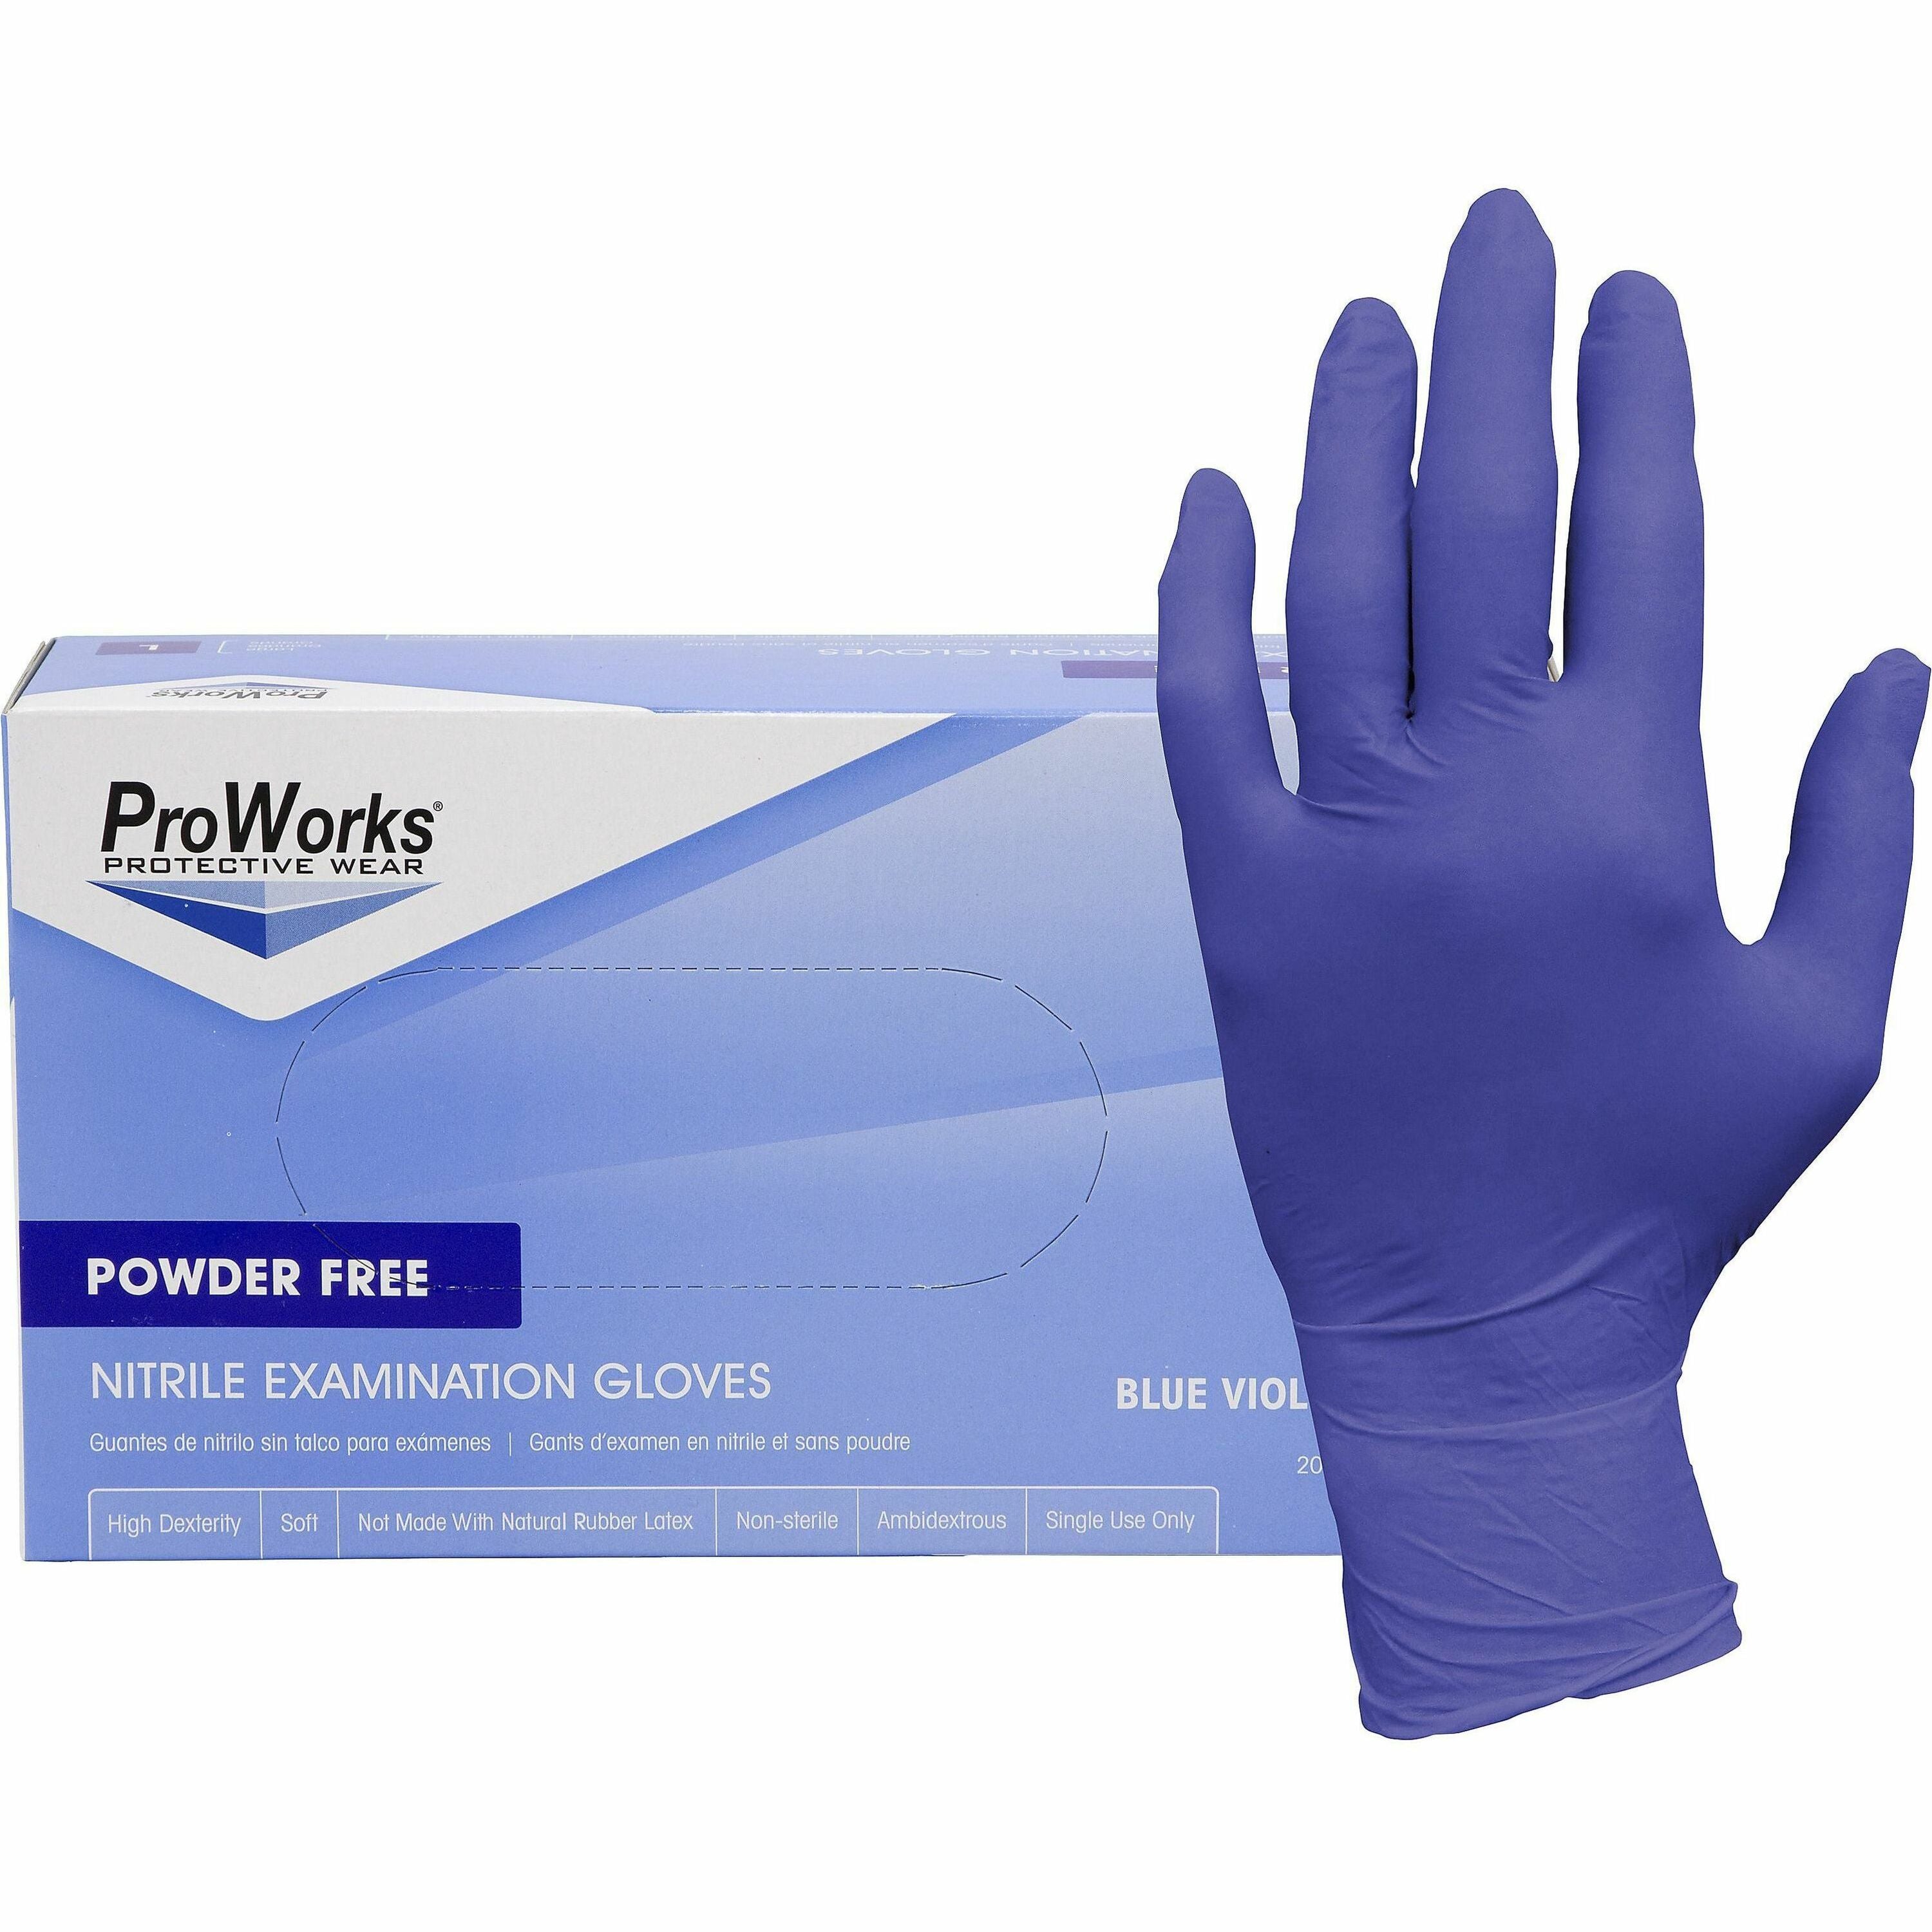 ProWorks Nitrile Exam Gloves - Large Size - Nitrile - Blue Violet - Soft, Flexible, Comfortable, Latex-free, Non-sterile - For General Purpose, Industrial, Food Service, Gardening, Dental - 200 / Box - 3 mil Thickness - 9.50" Glove Length